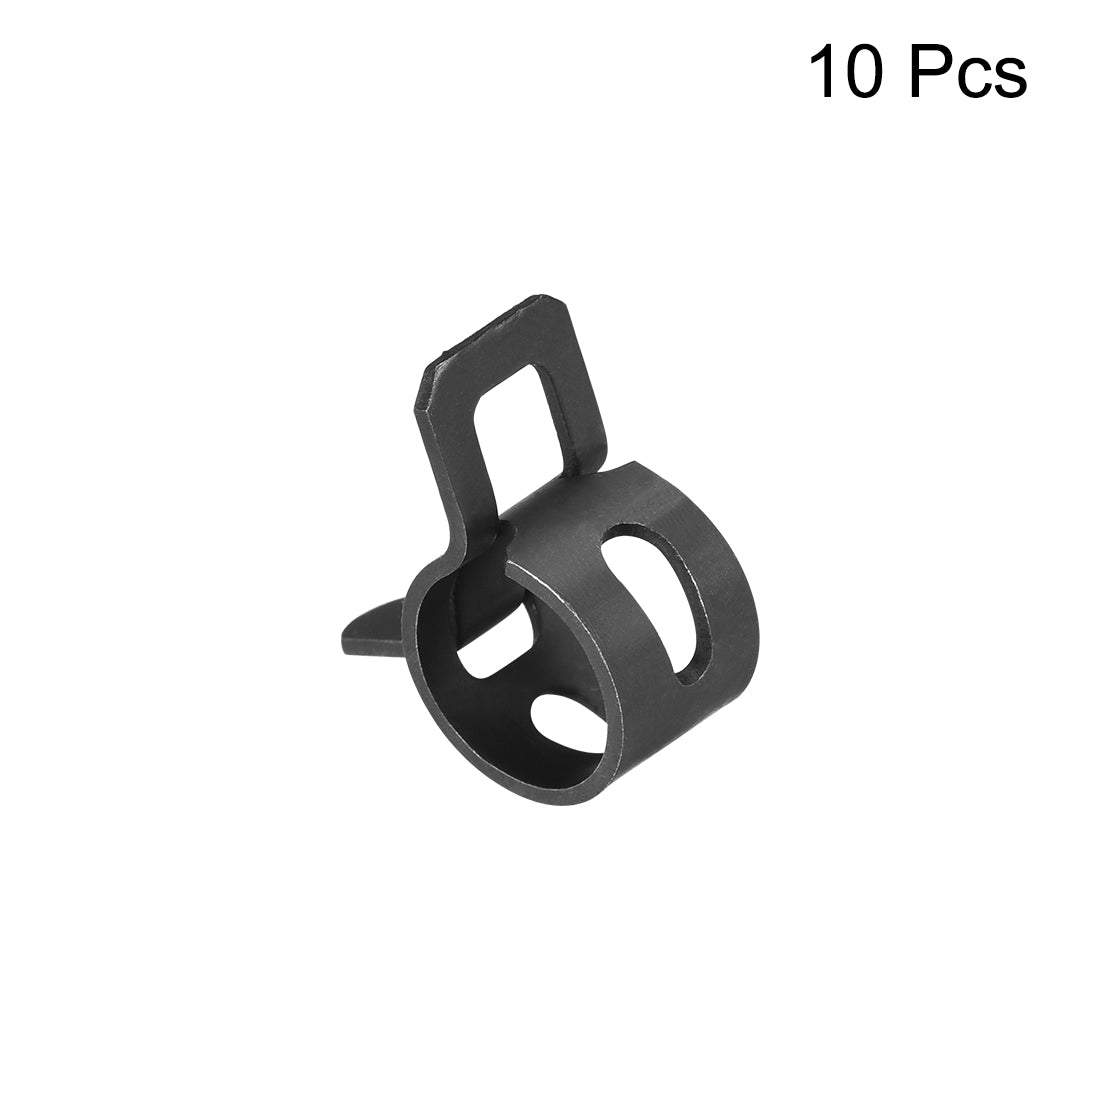 Uxcell Uxcell Steel Band Clamp 9mm Inner Dia Fit 9.5-10.2mm OD Hose for Fuel Line Silicone Tube Spring Clips Black Manganese Steel 10Pcs